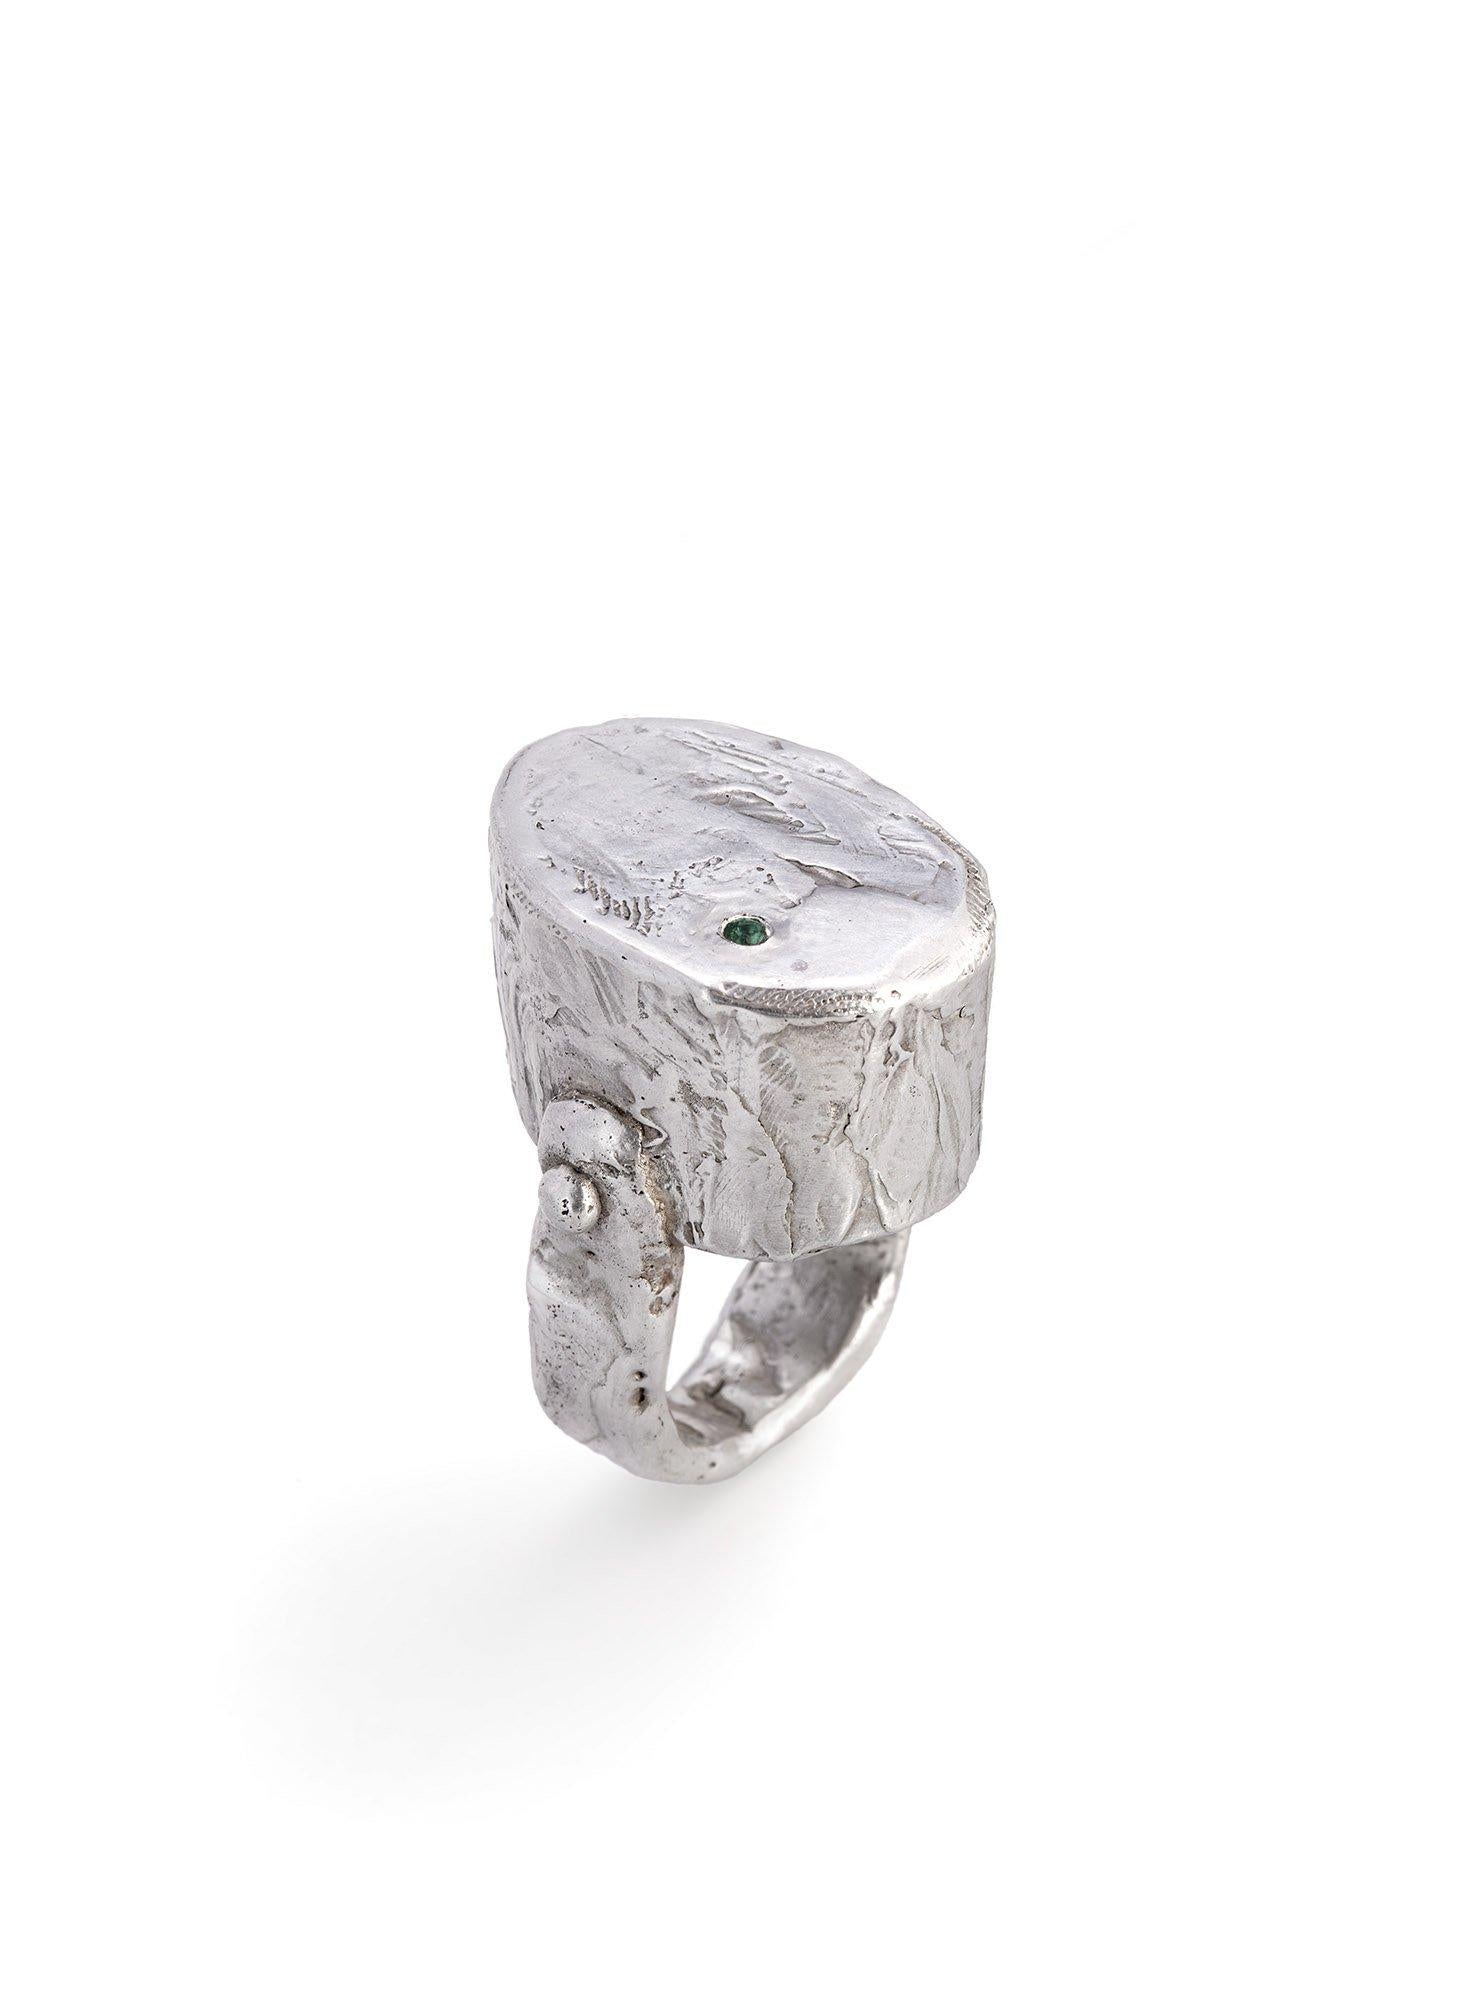 sculpted silver ring set with emerald